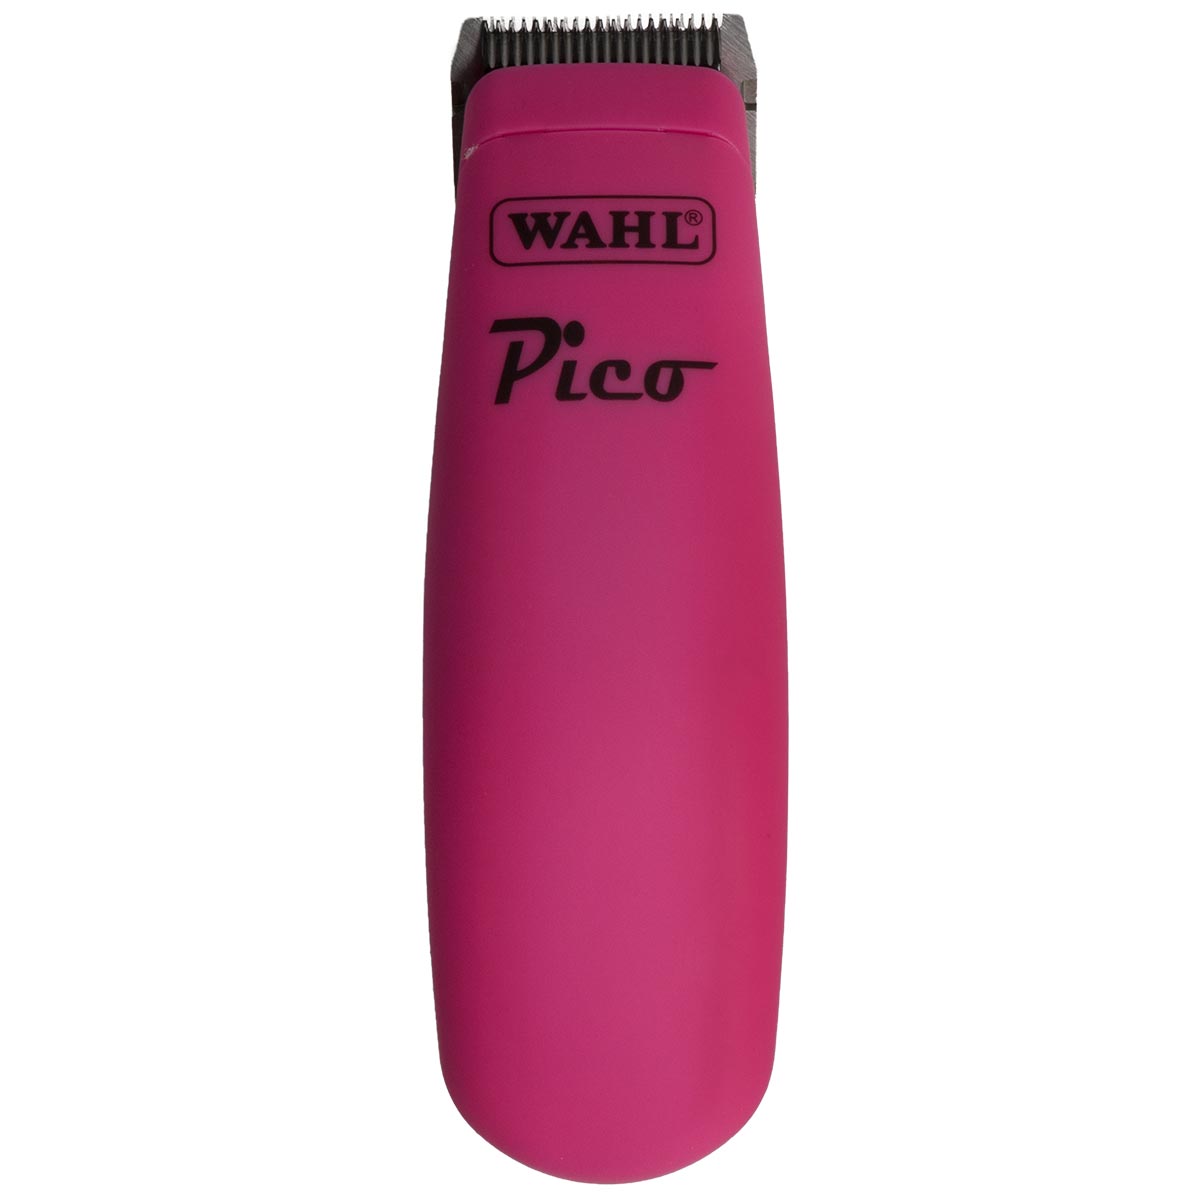 Wahl Pico Trimmer cordless